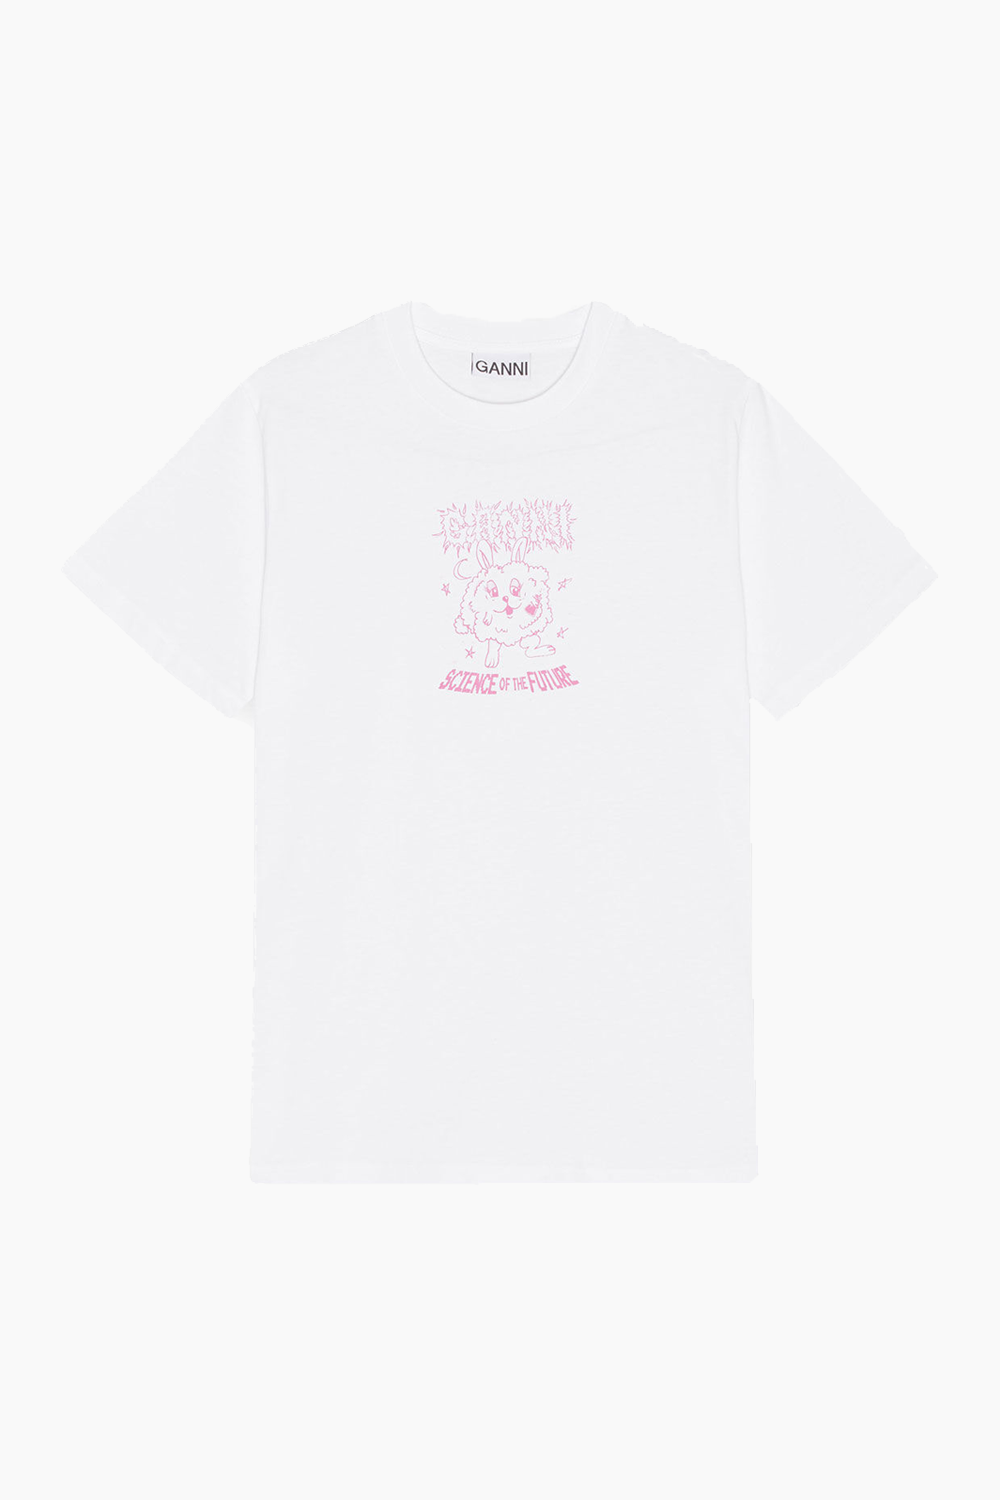 Basic Jersey Pink Bunny Relaxed T-shirt - Bright White - GANNI